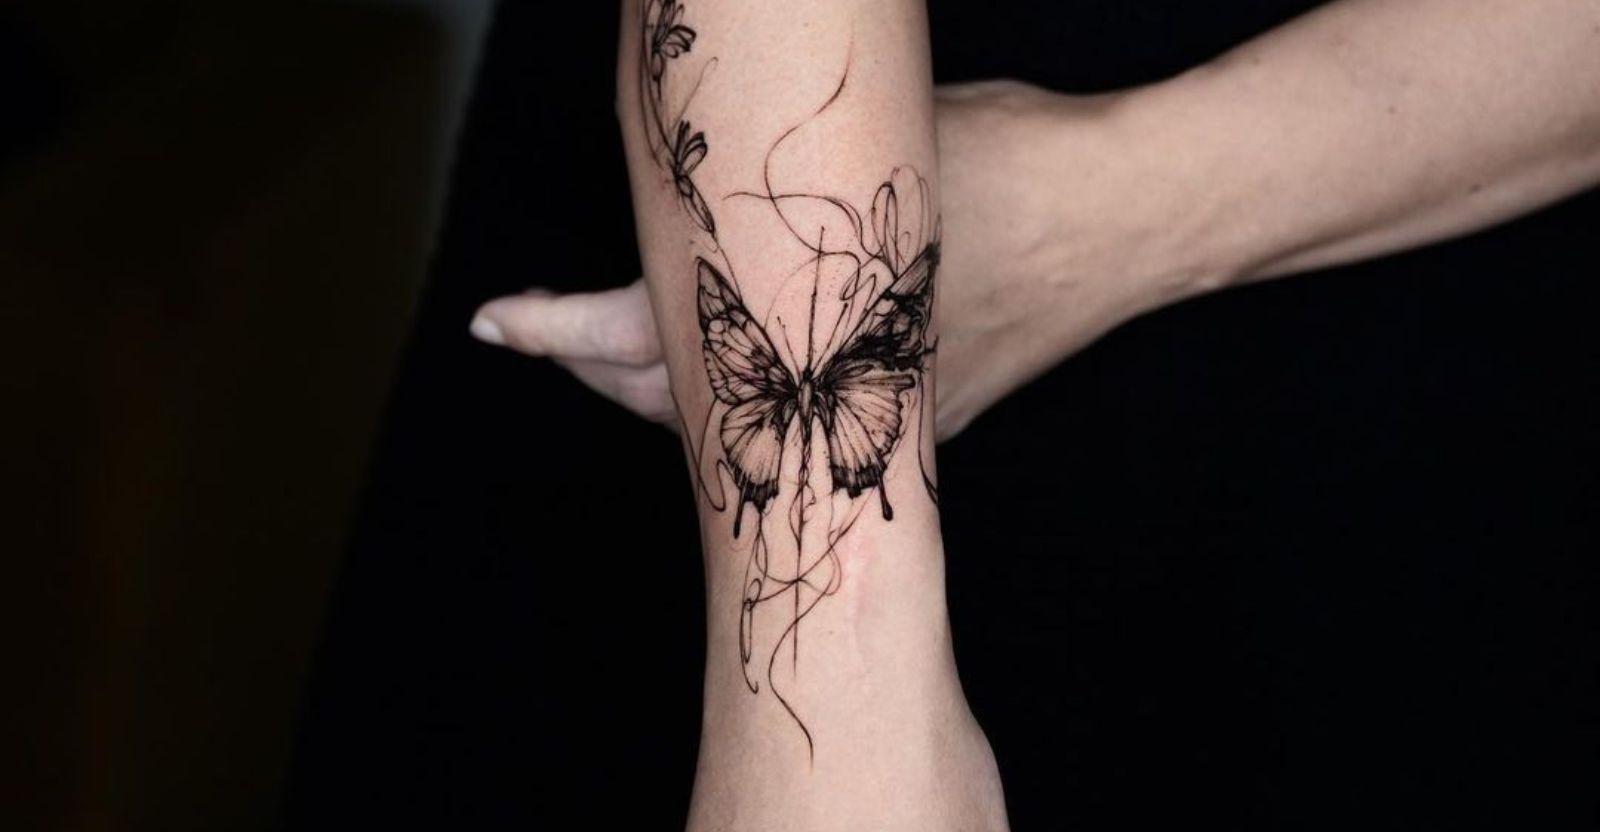 10 Delicate And Small Tattoo Ideas That You Won't Regret | Preview.ph